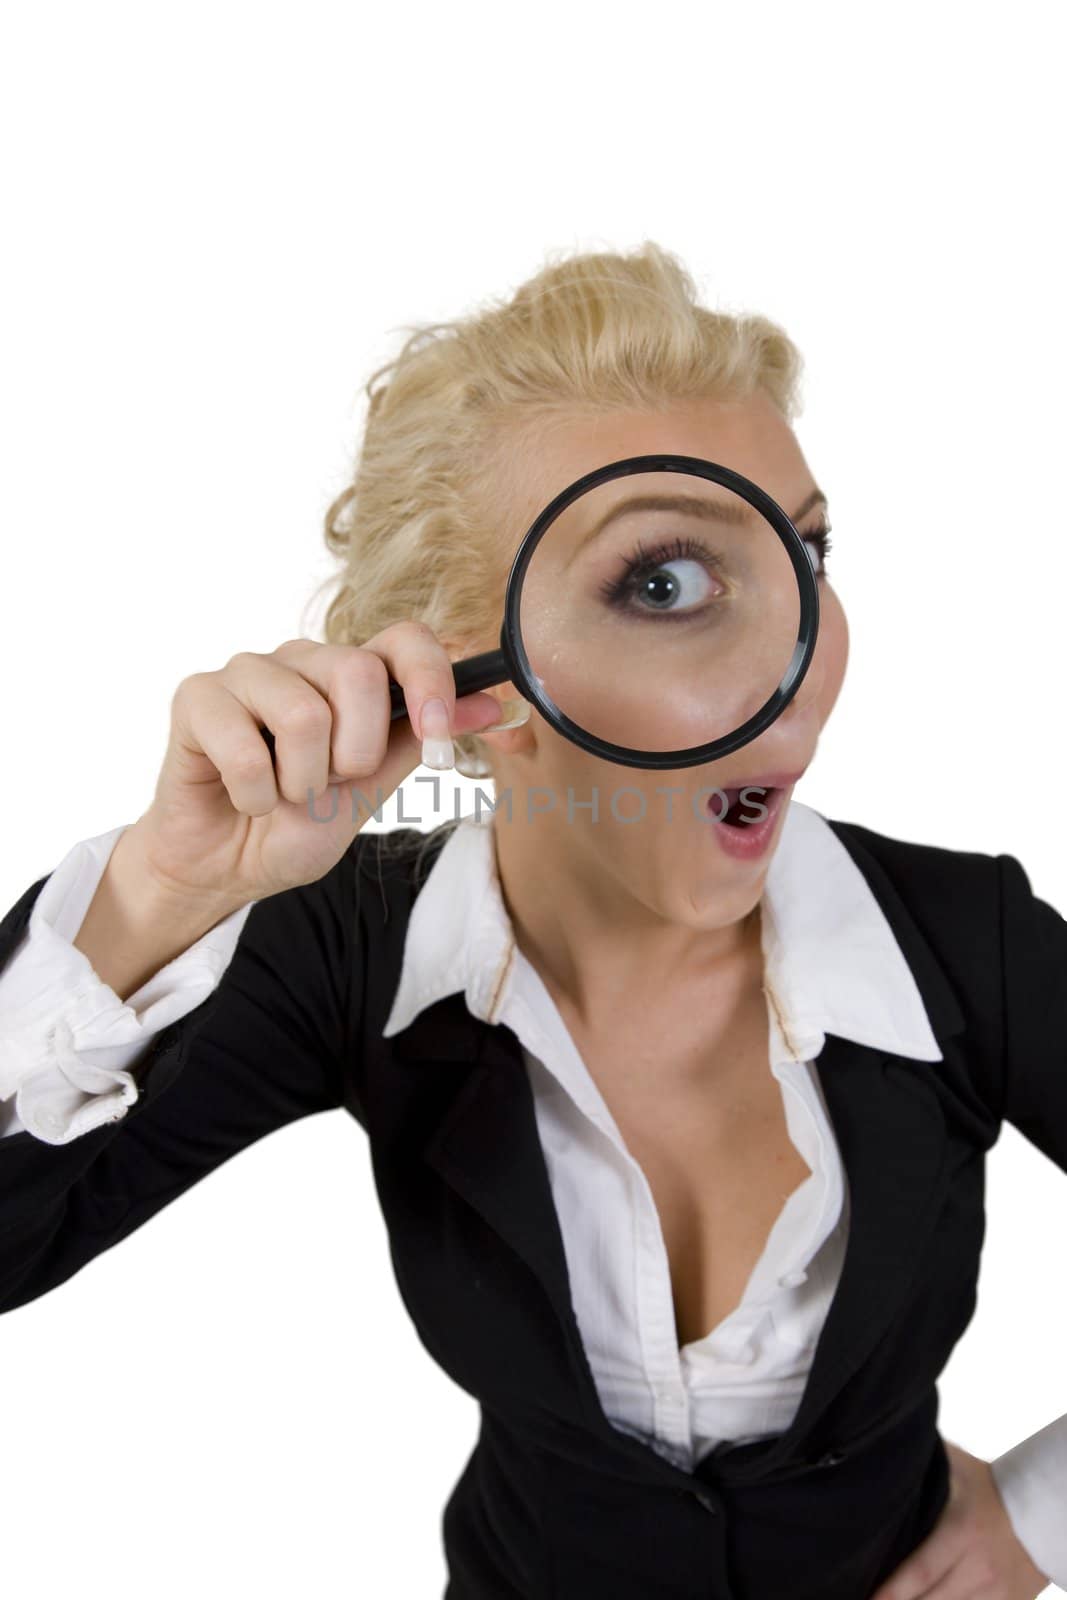 magnified eye of woman on white background